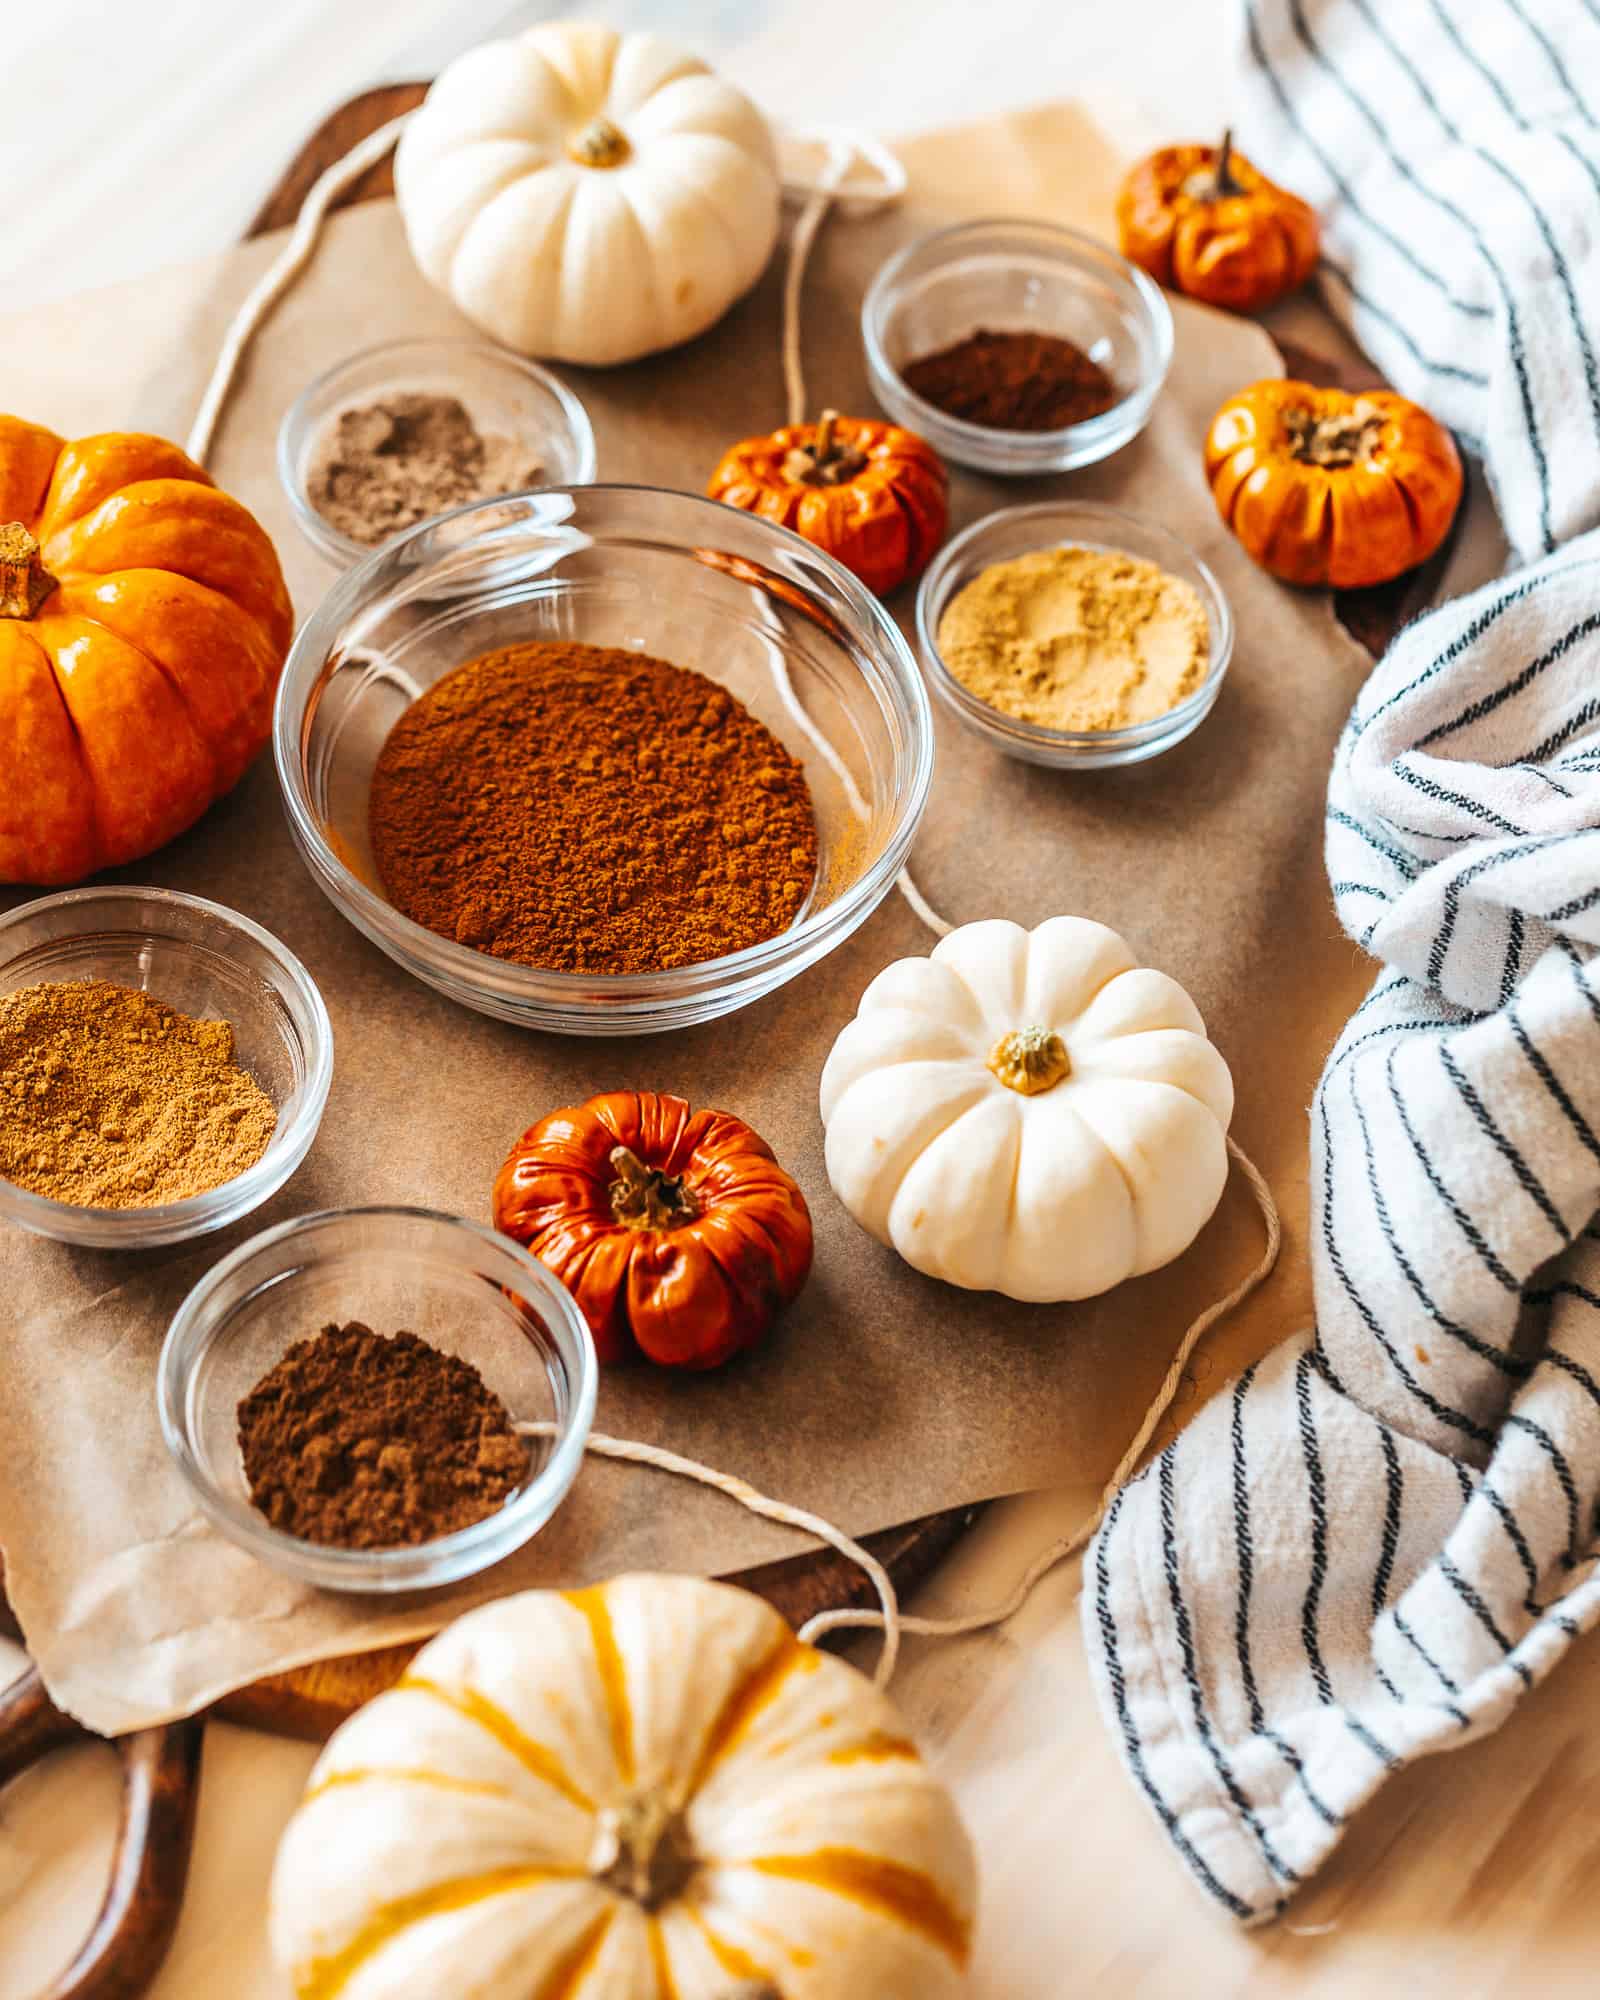 Overhead view of an assortment of the ingredients for the Spice recipe in glass bowls, along with an assortment of pumpkins and a striped blue and white cloth.